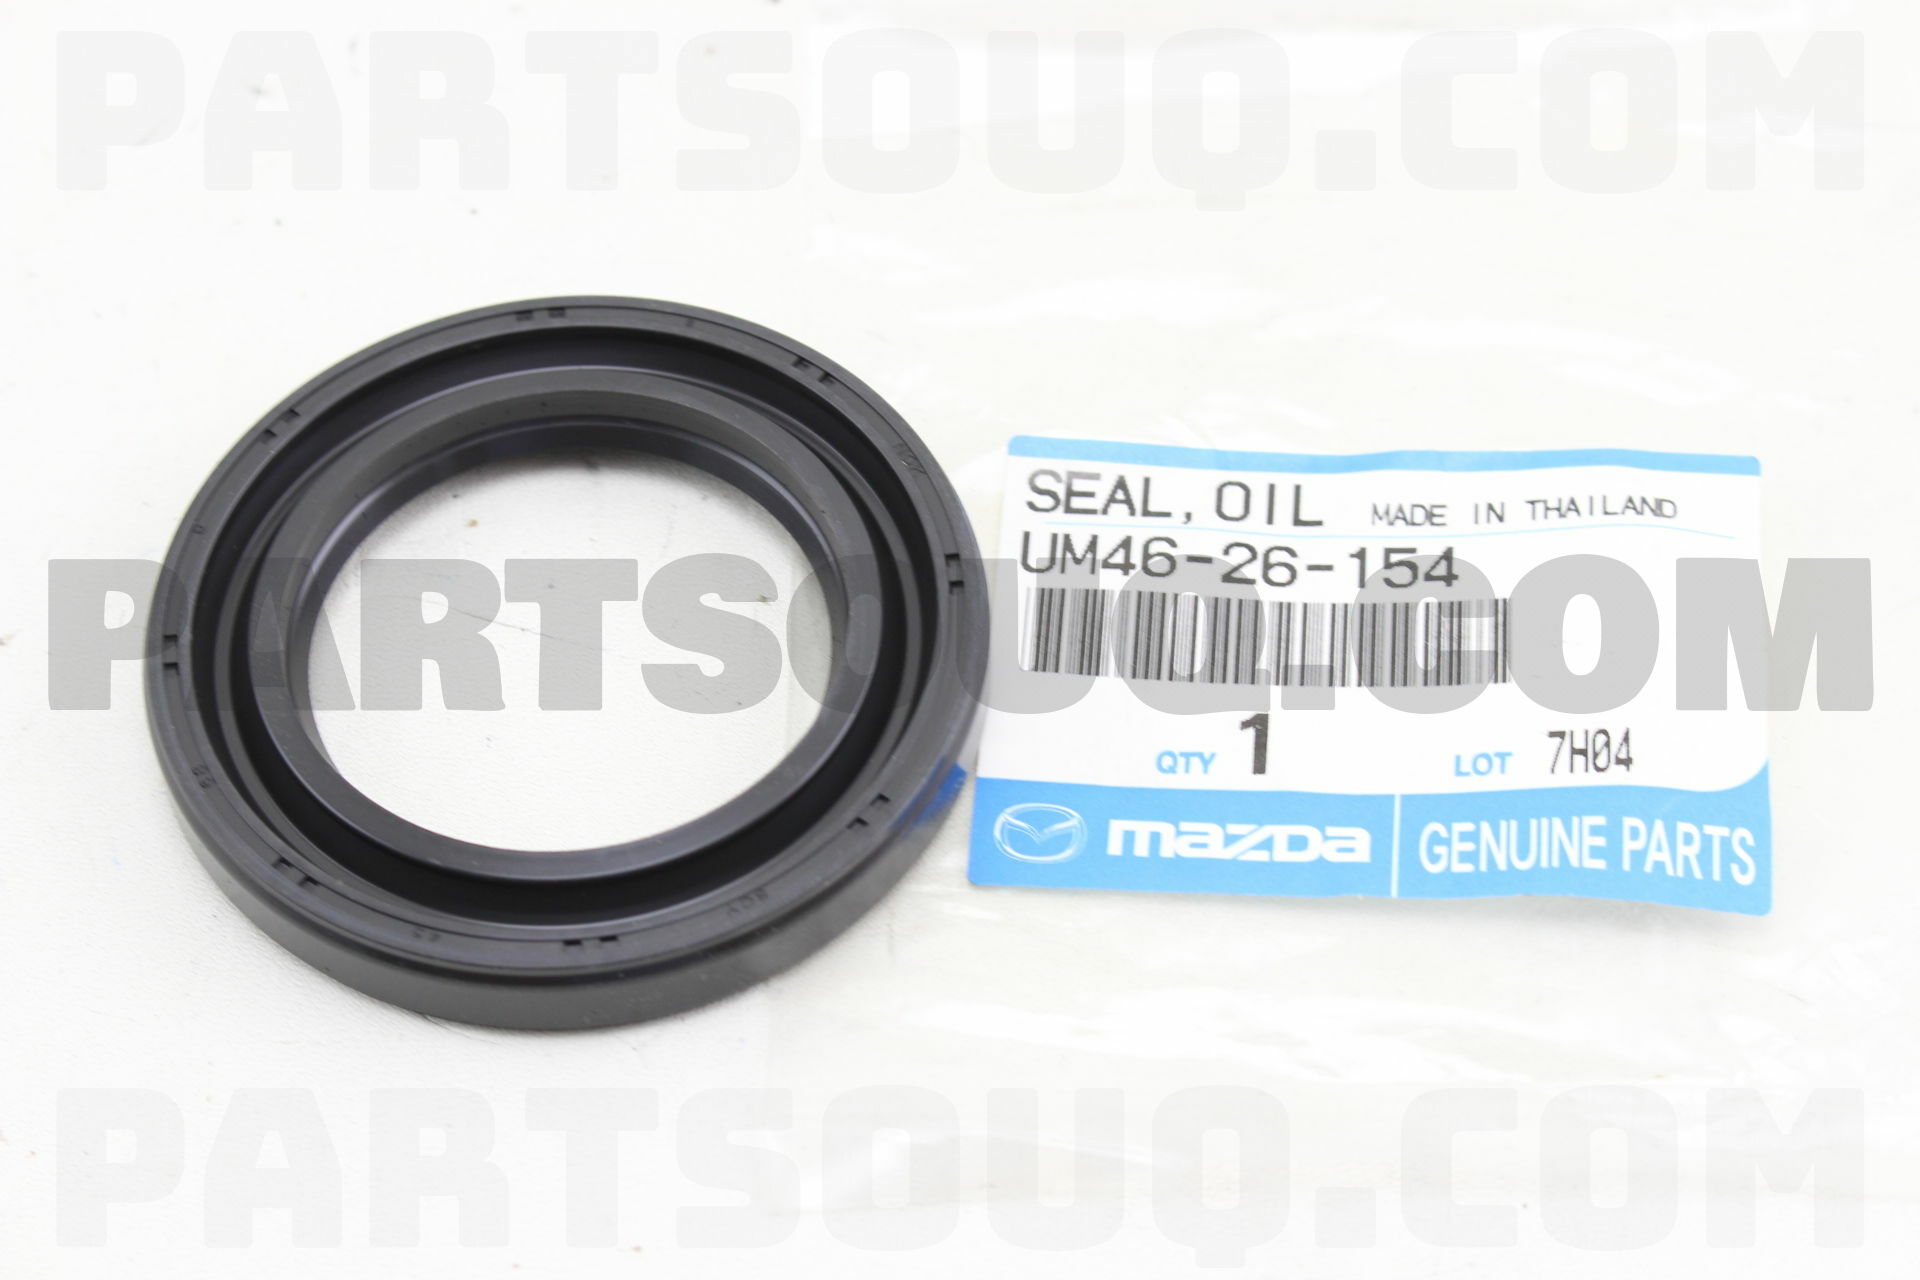 Details about   W02526154A Genuine Mazda SEAL,OIL-REAR AXLE W025-26-154A